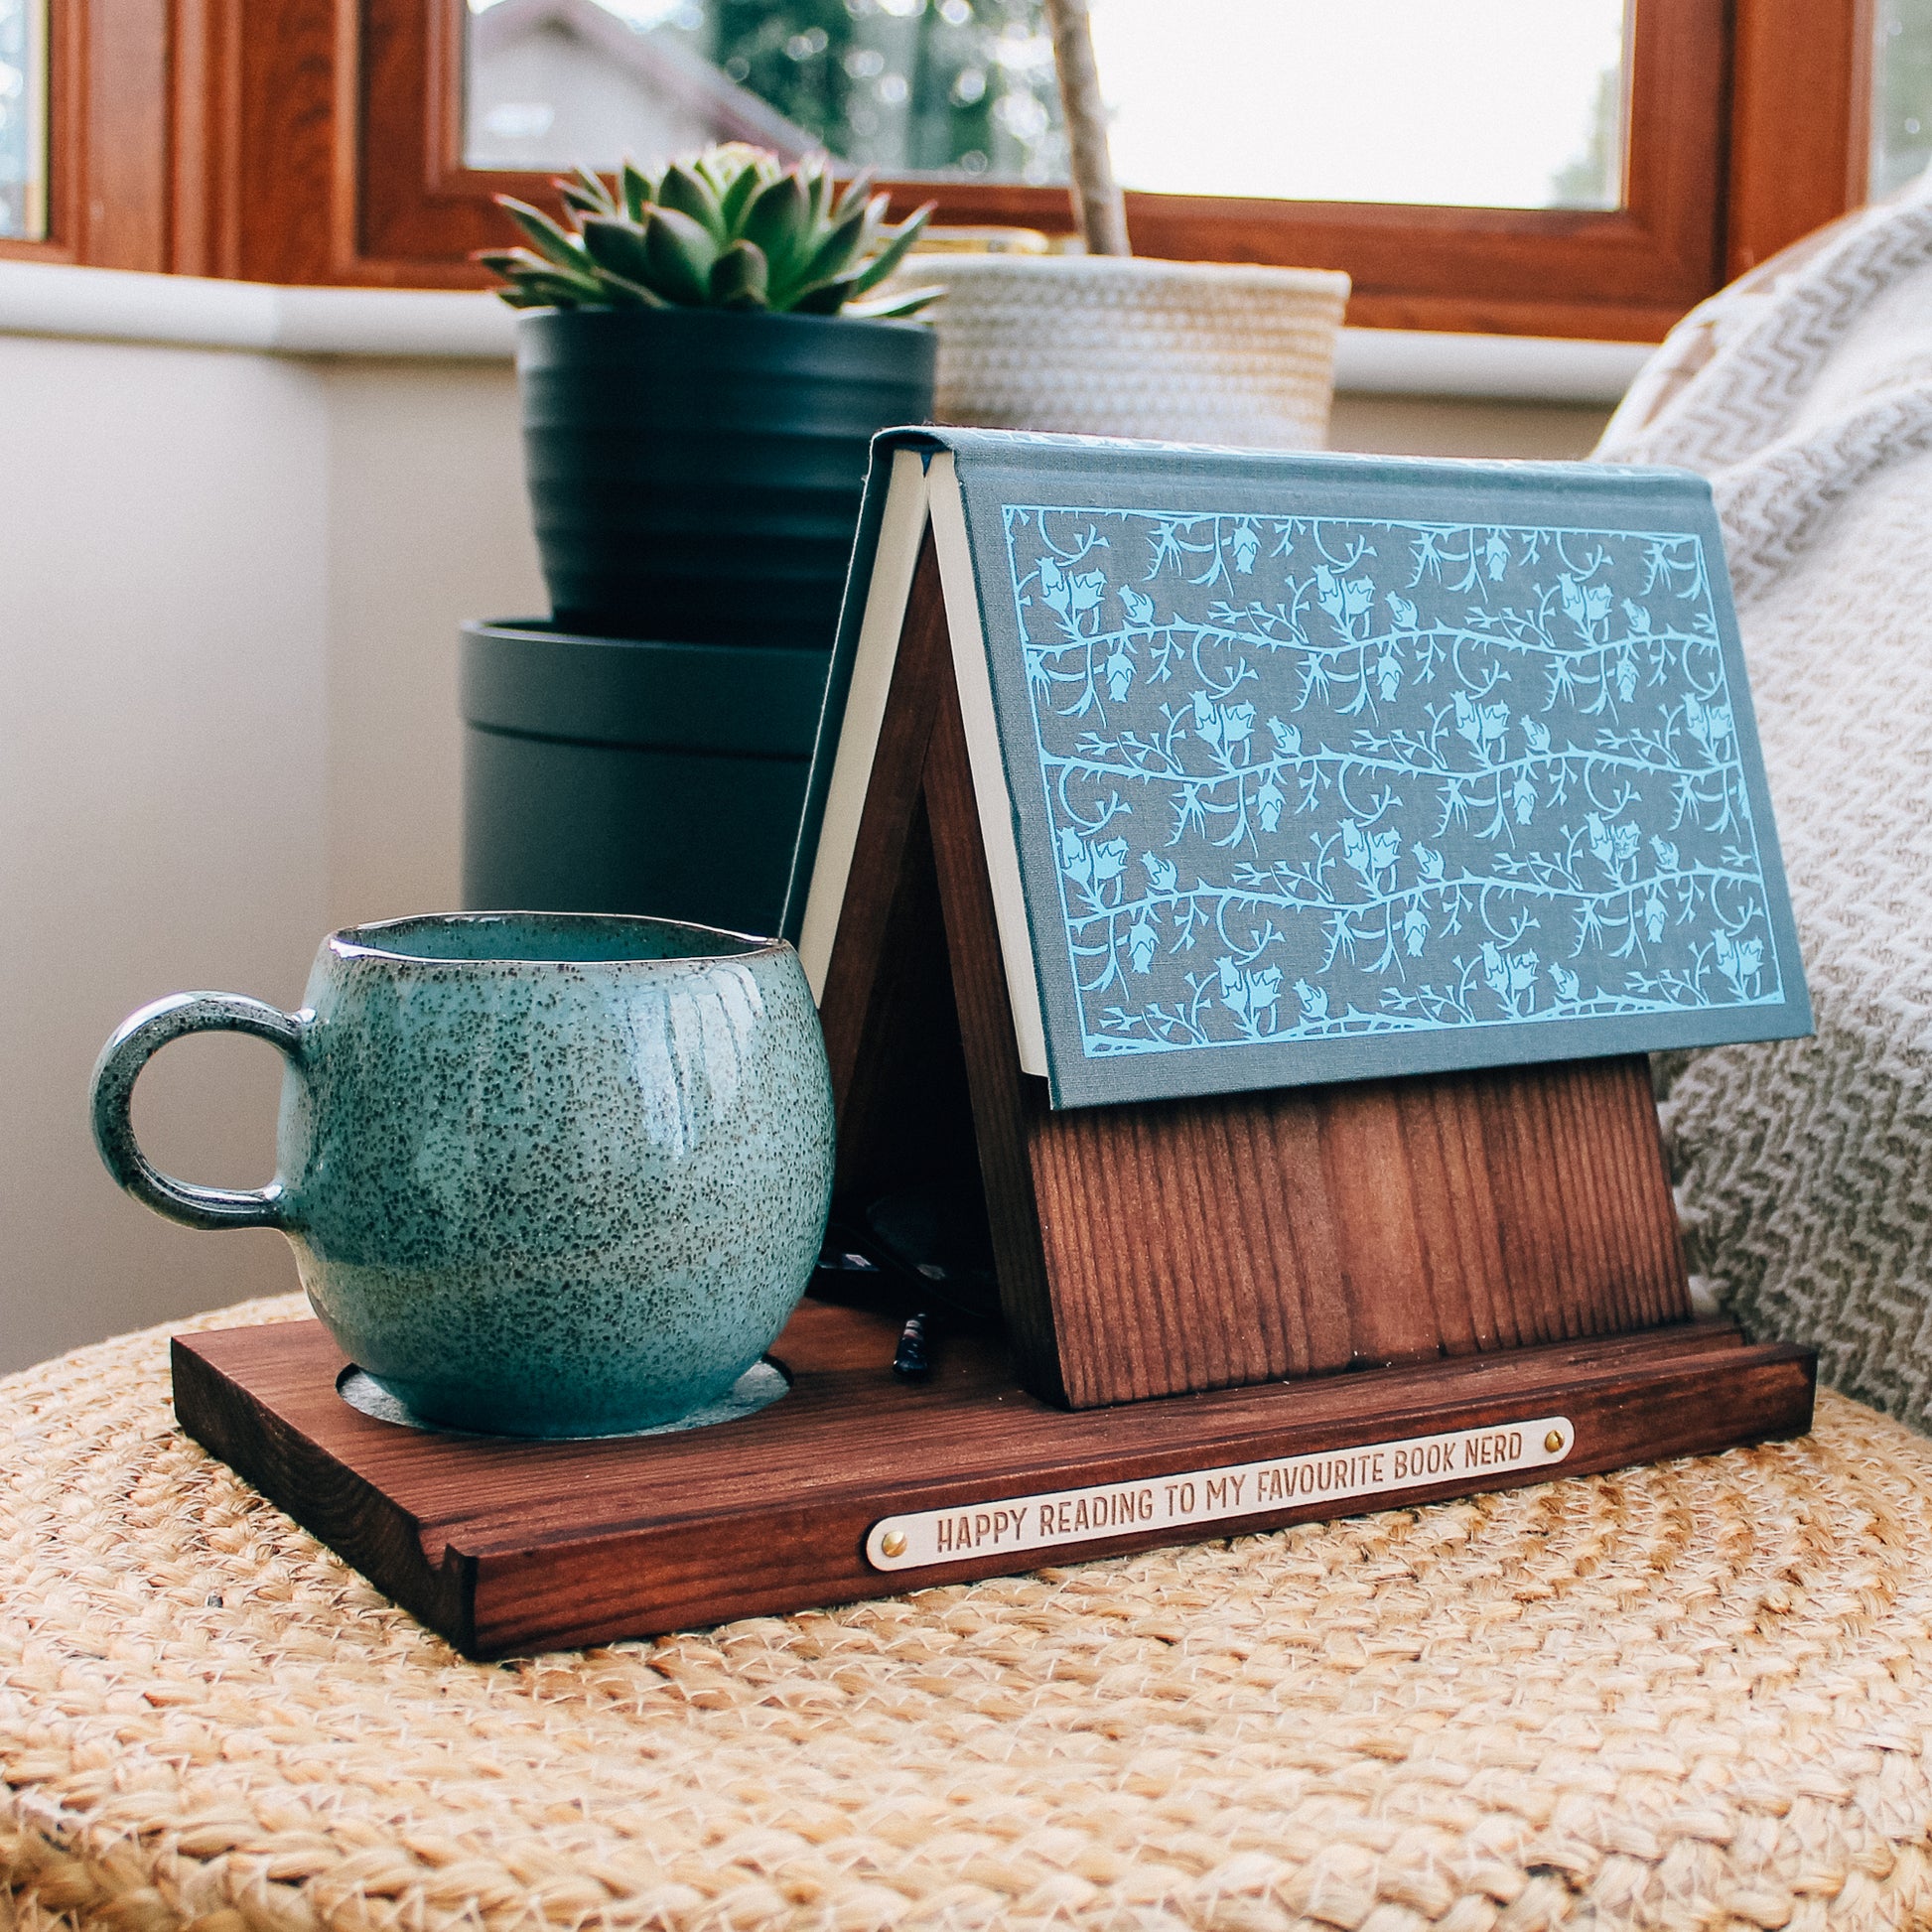 The perfect companion for  the book lover in you life. This personalised dark wooden book valet and a steaming cup of tea.